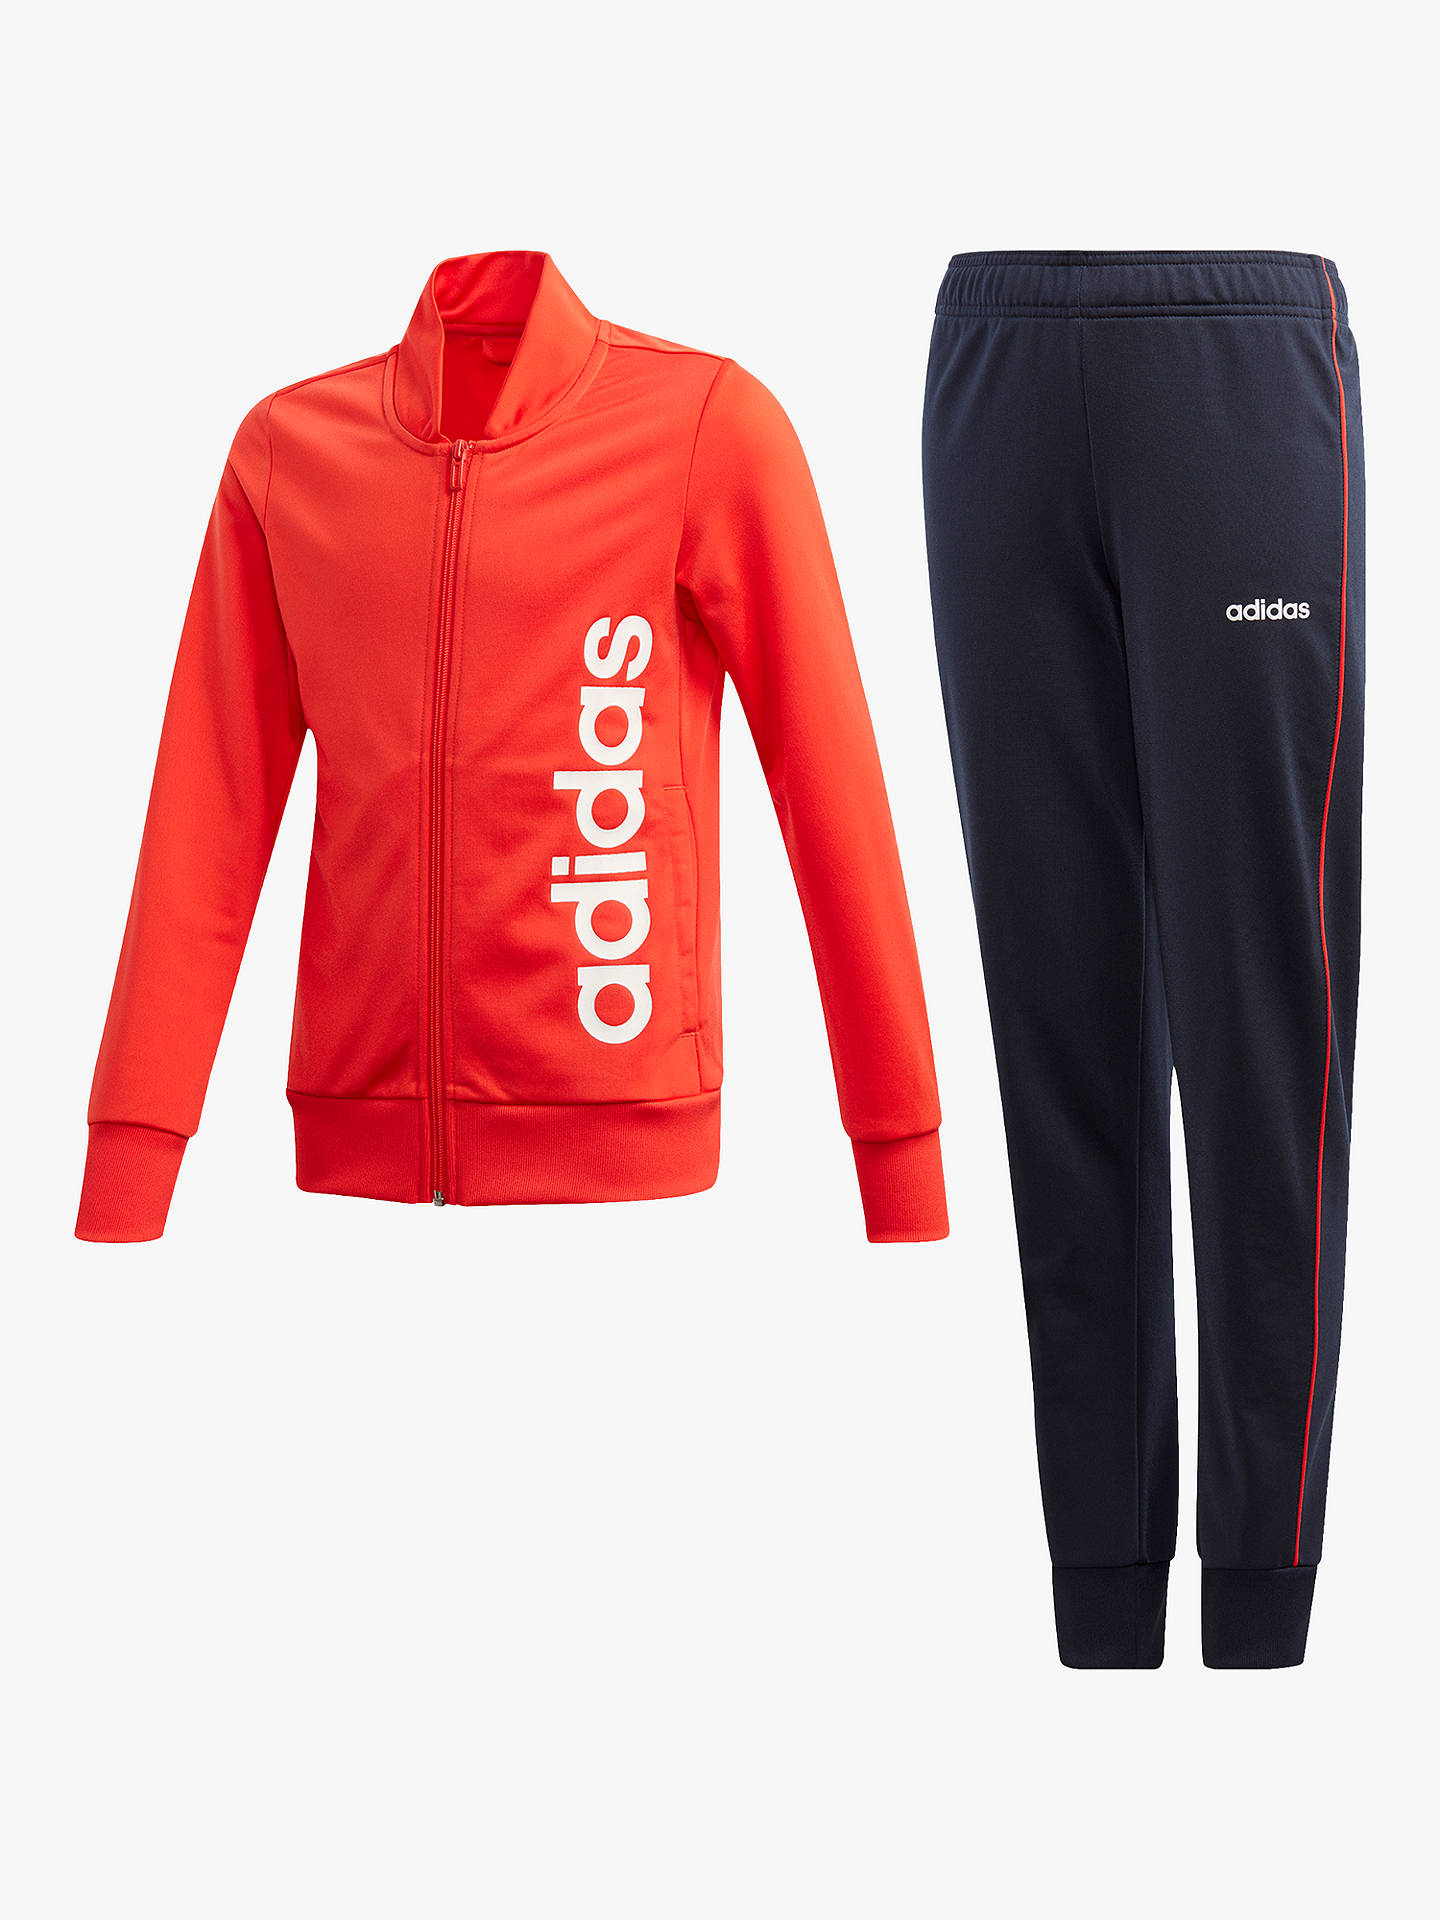 adidas Children's Two-Tone Tracksuit, Multi at John Lewis & Partners